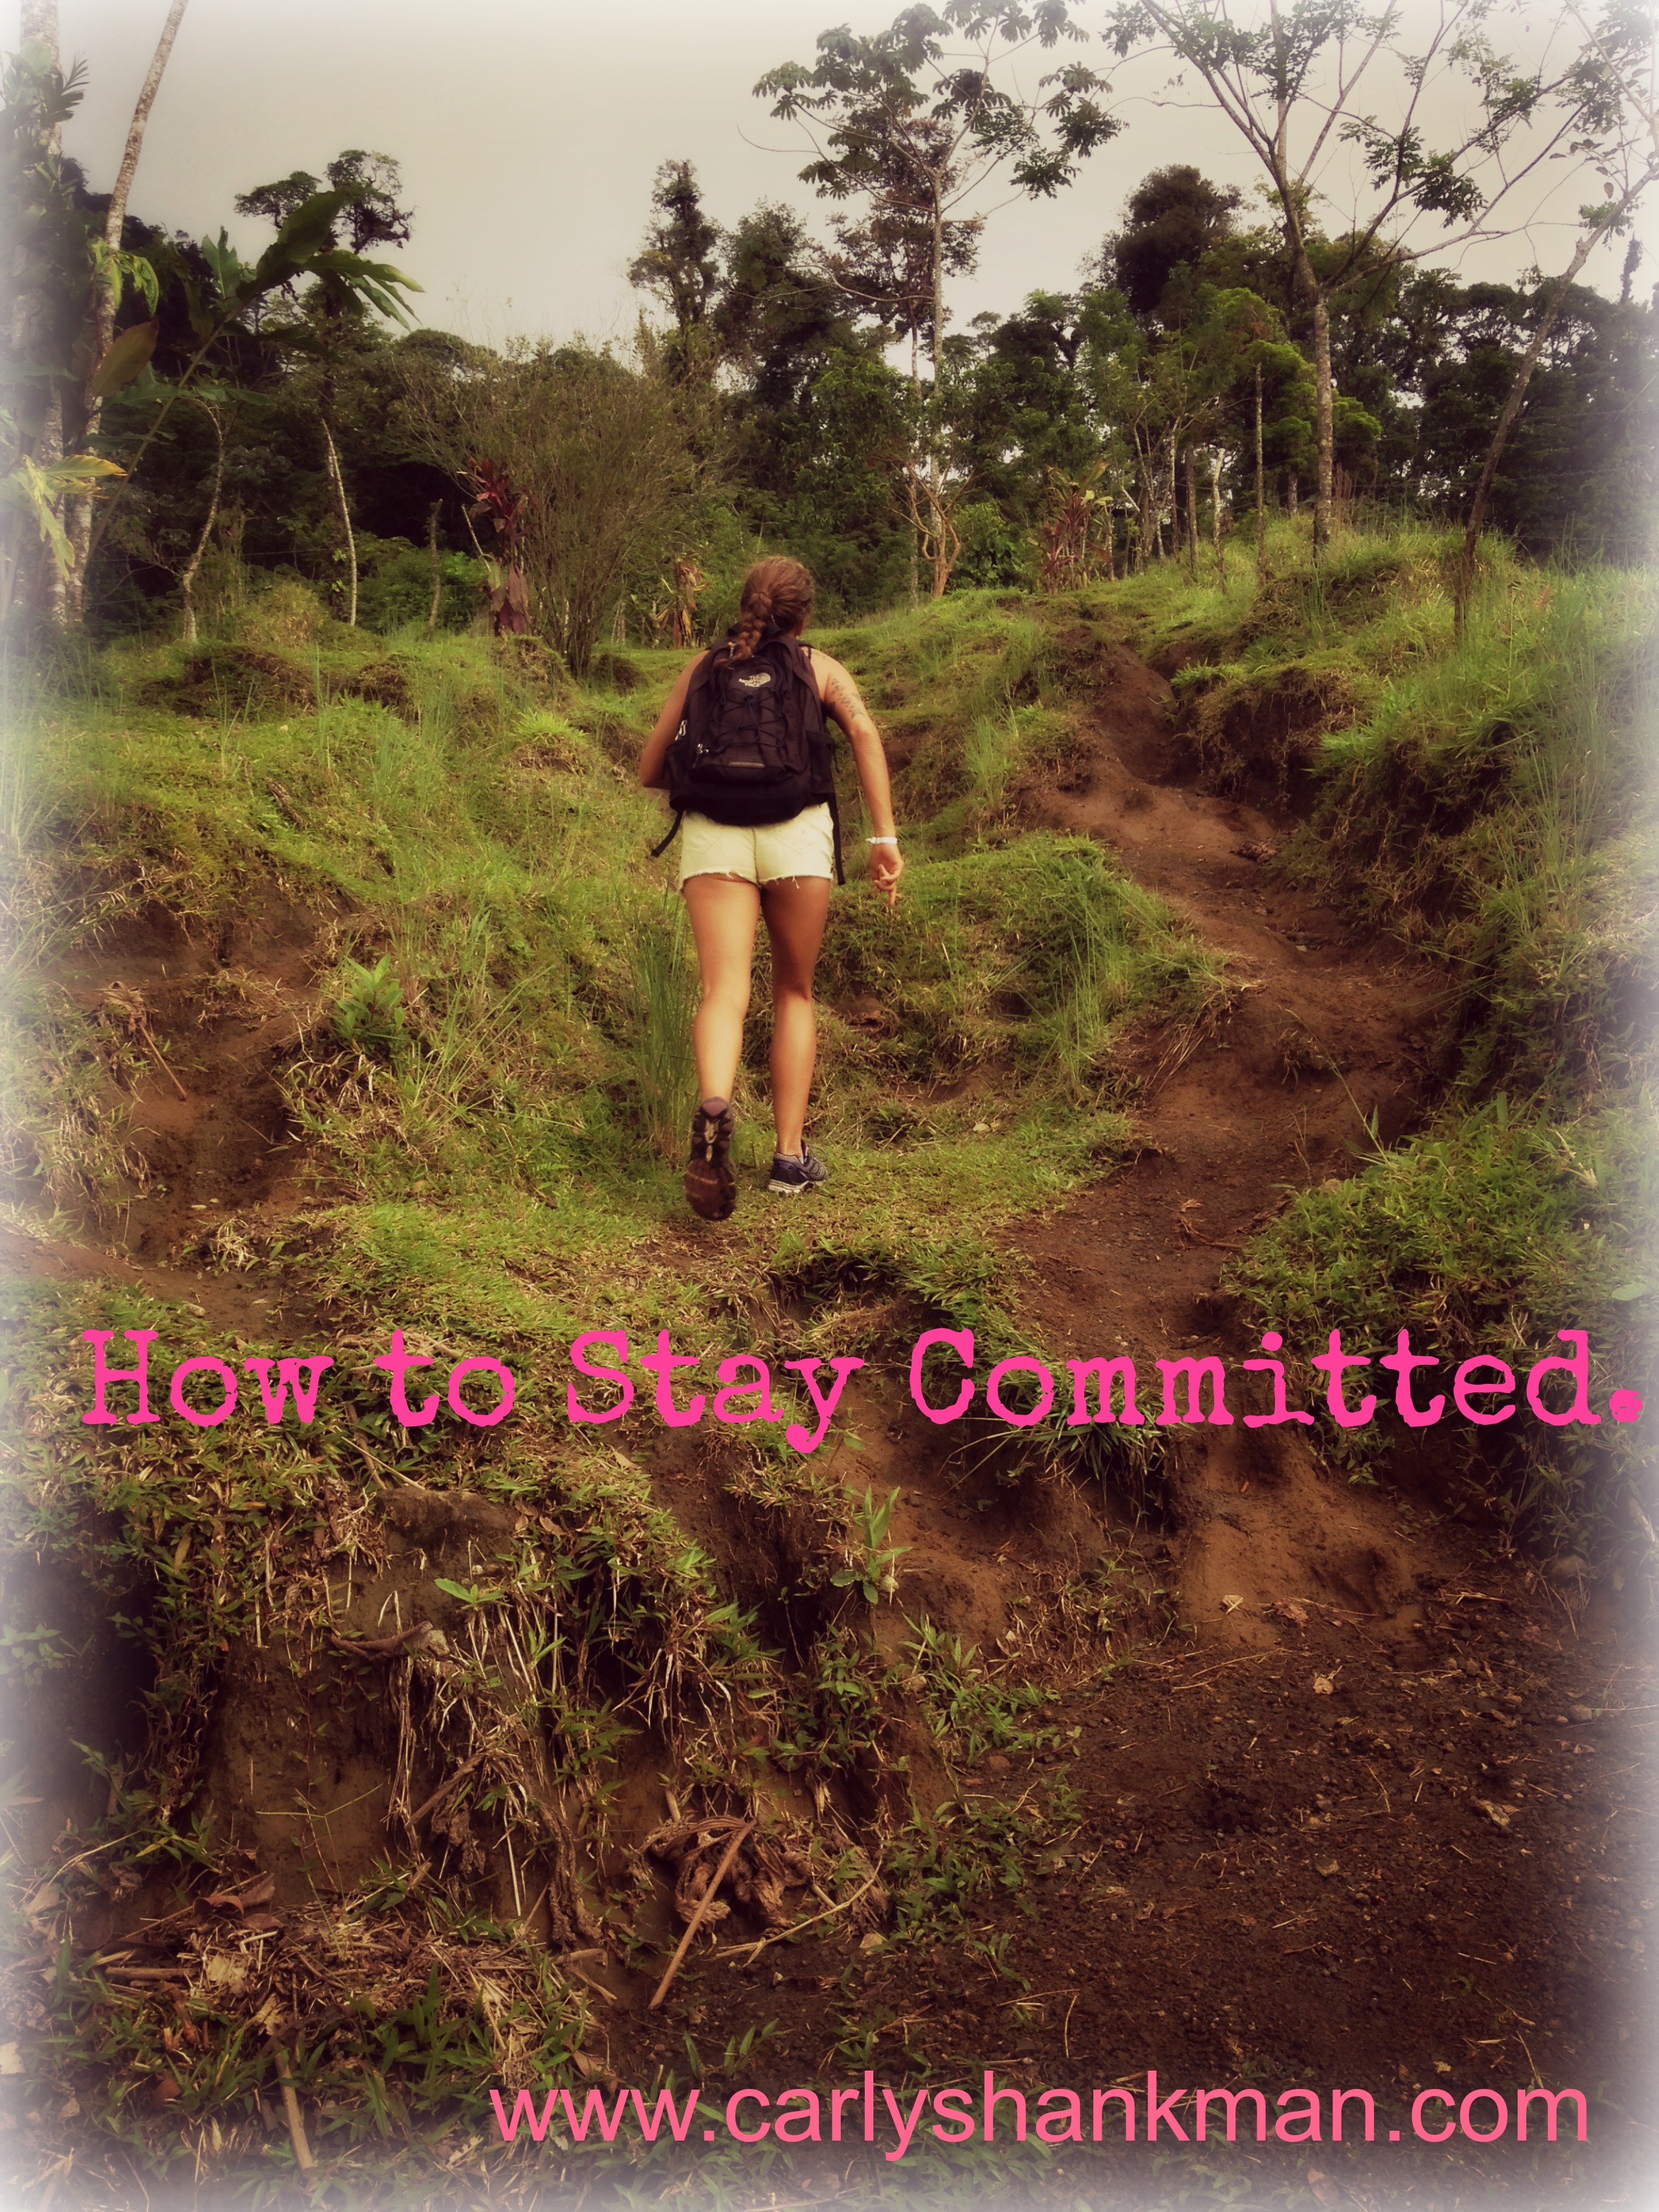 5 ways to stay committed to a healthy lifestyle.